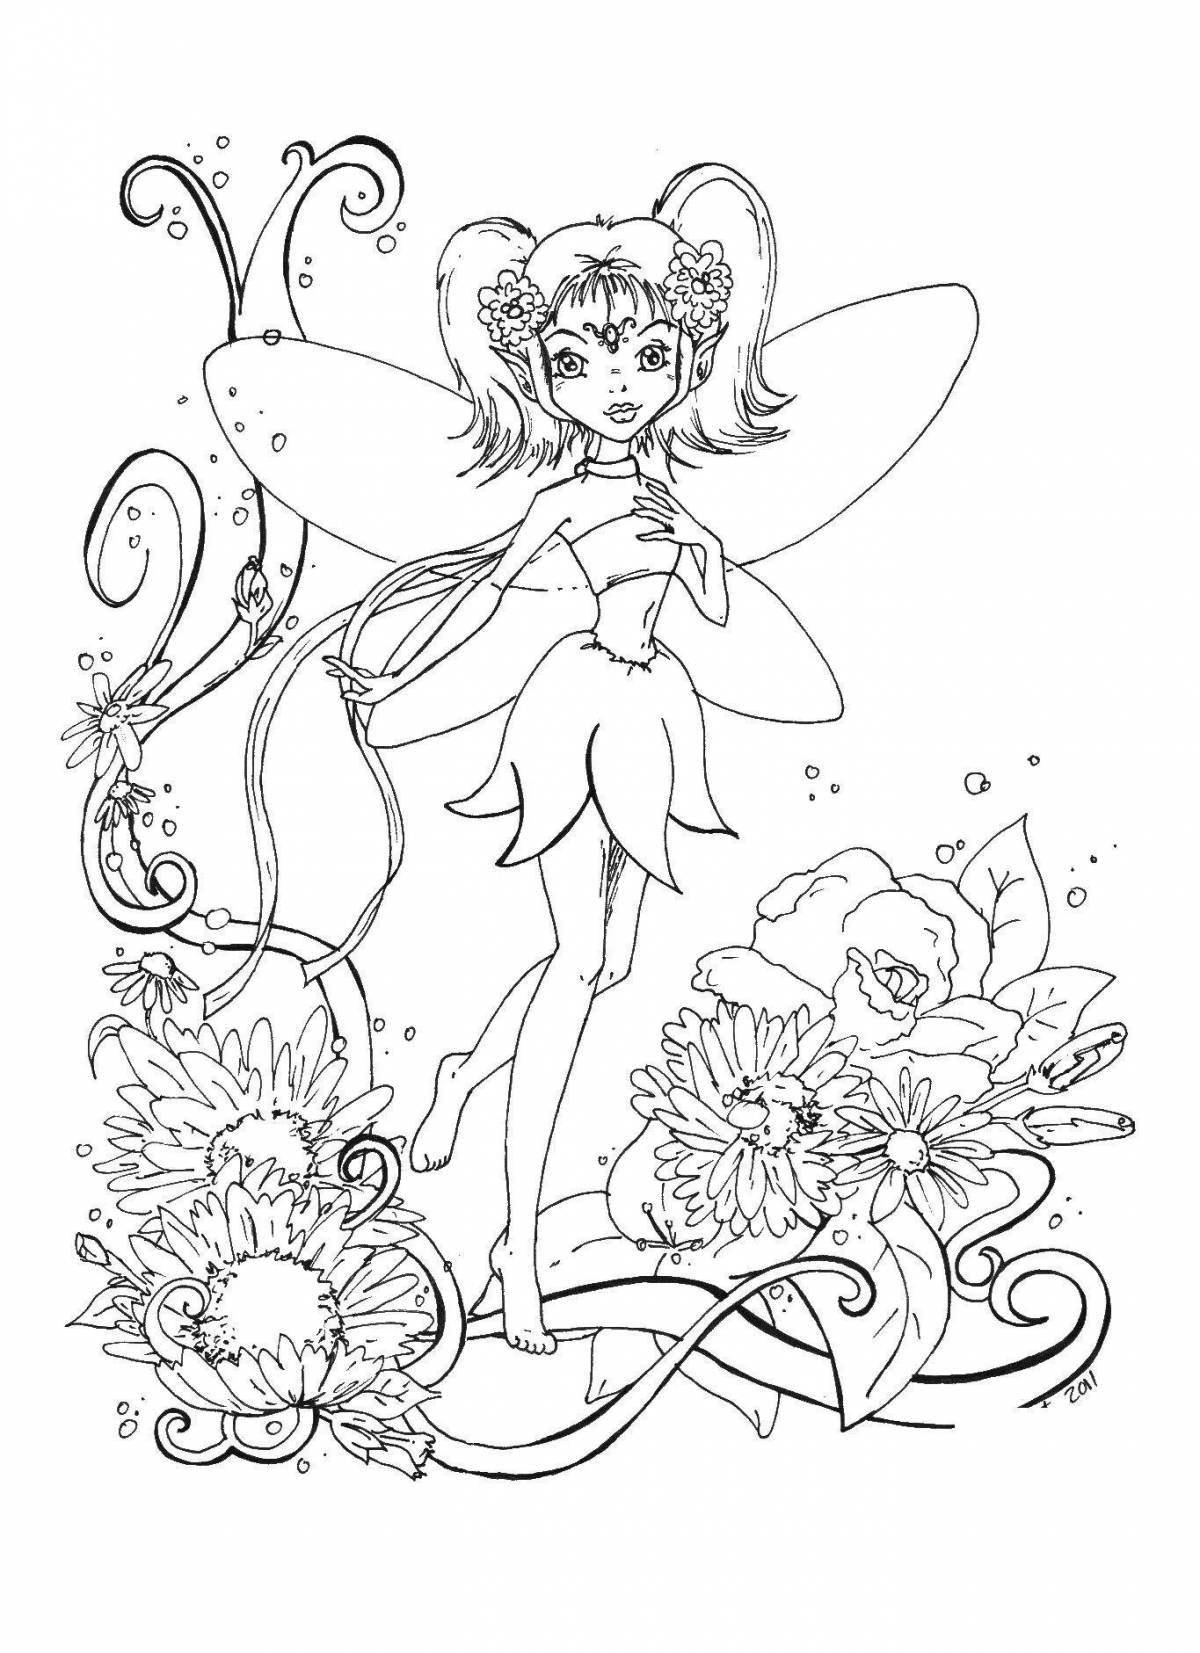 Shining flower fairy coloring book